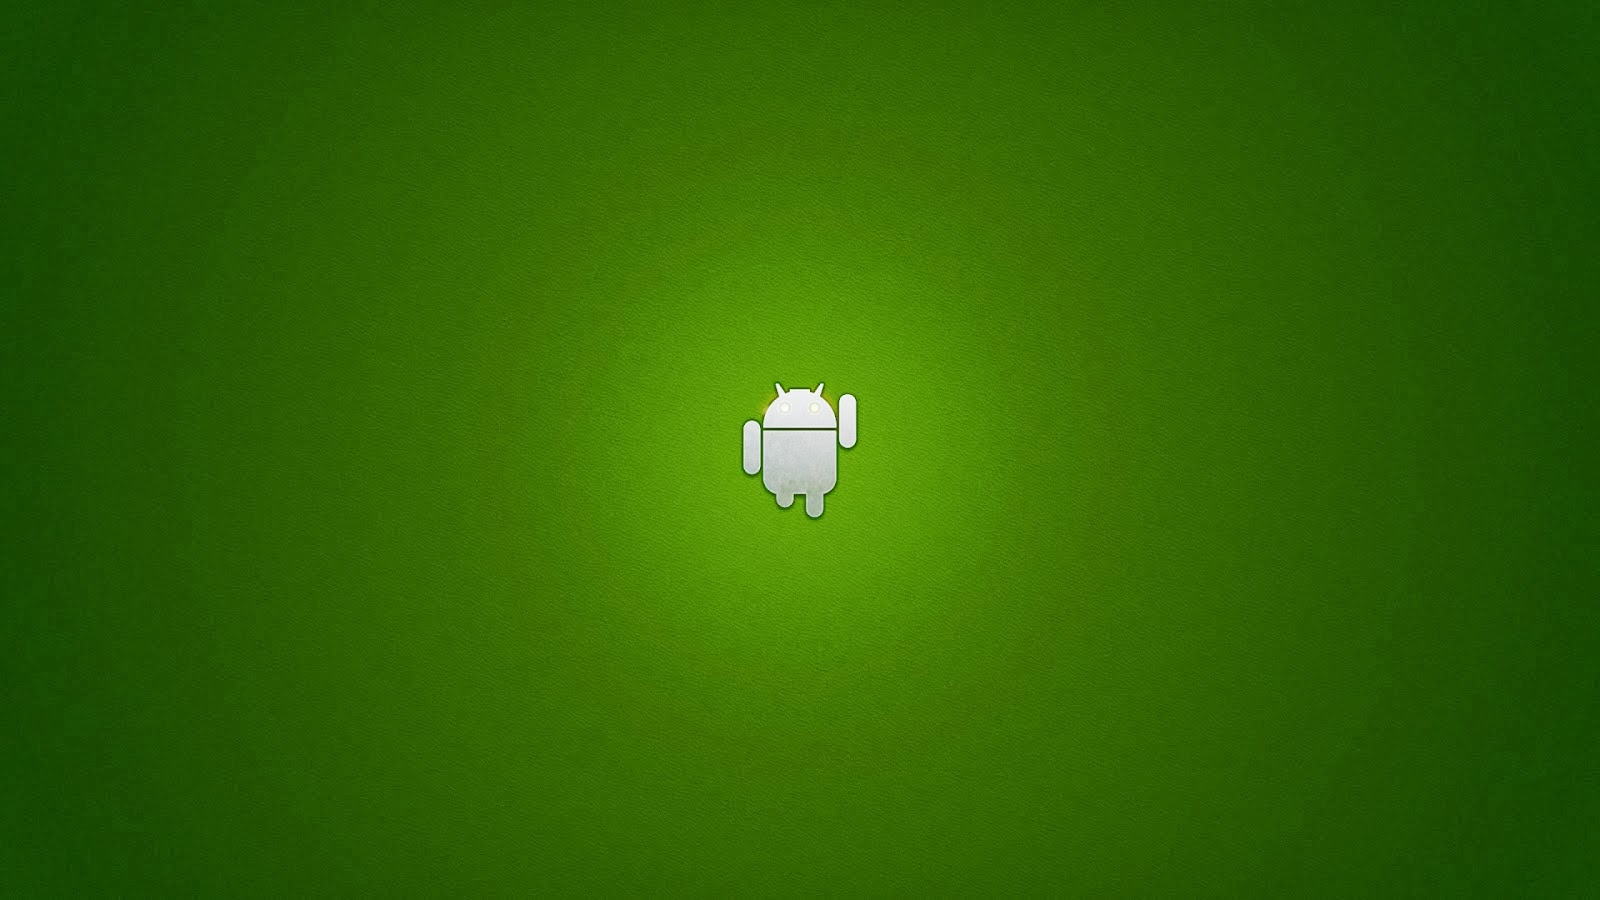 Android Wallpaper Dimensions - reviveopdesign